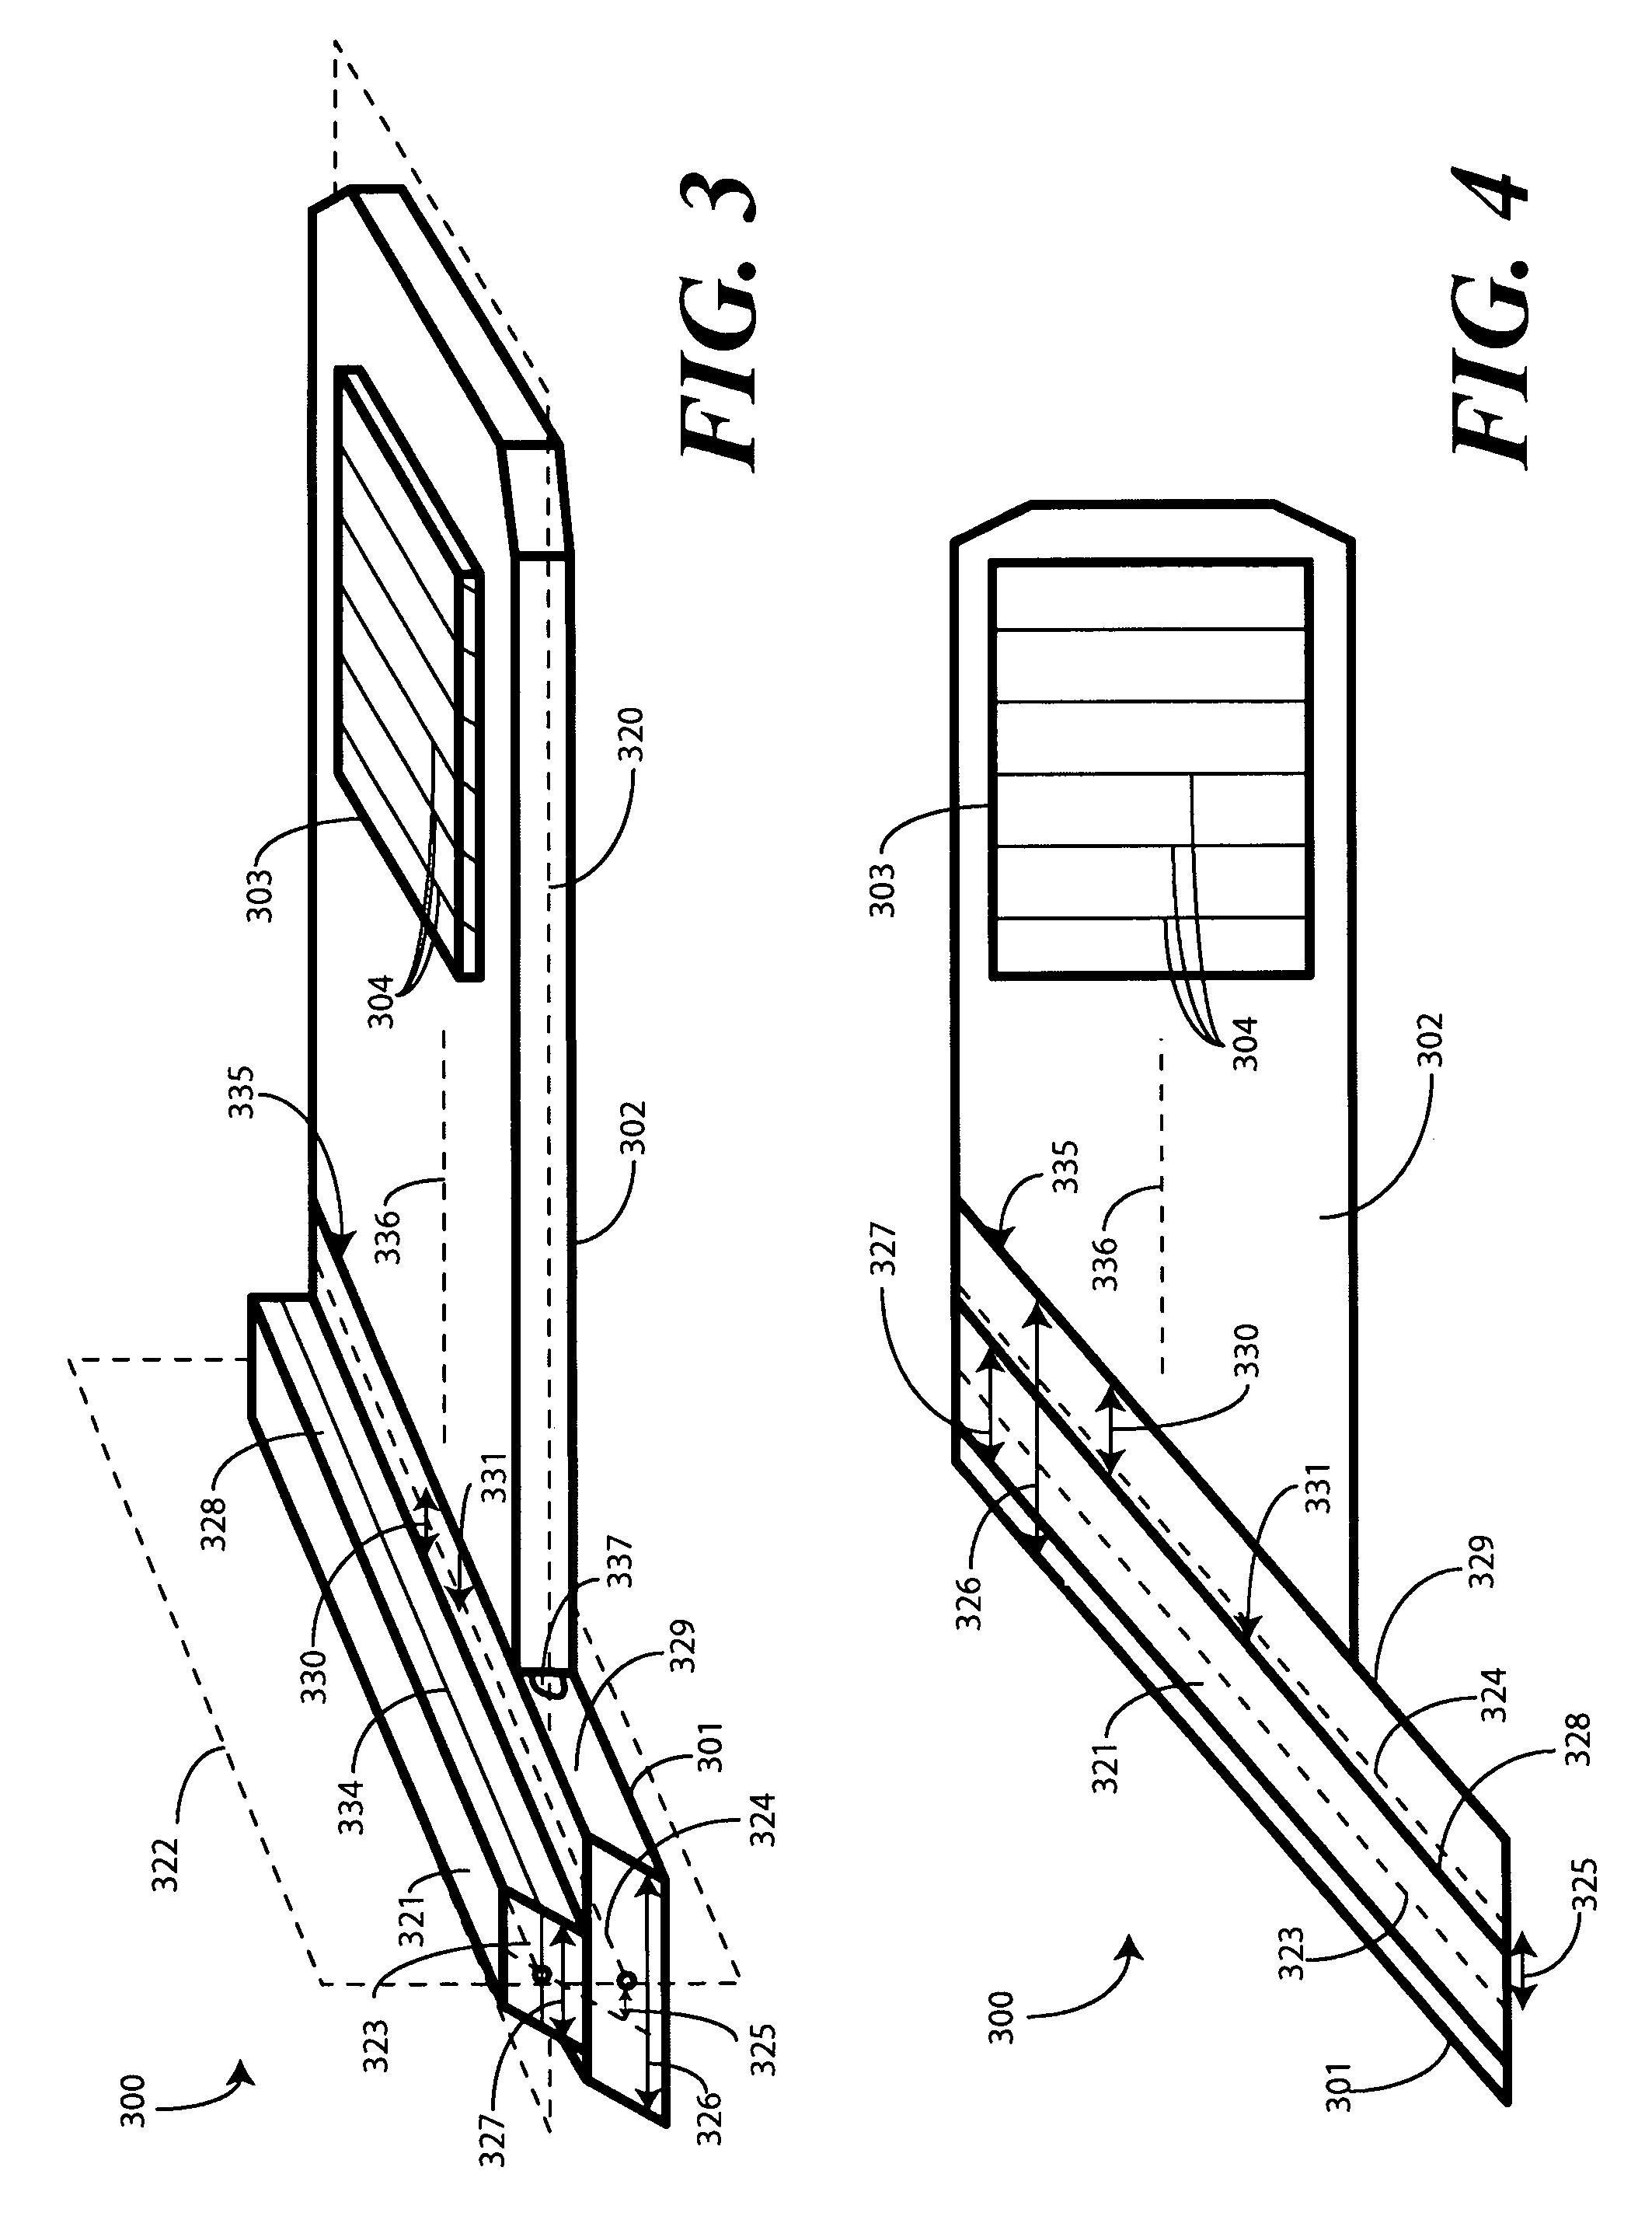 Optical substrate guided relay with input homogenizer